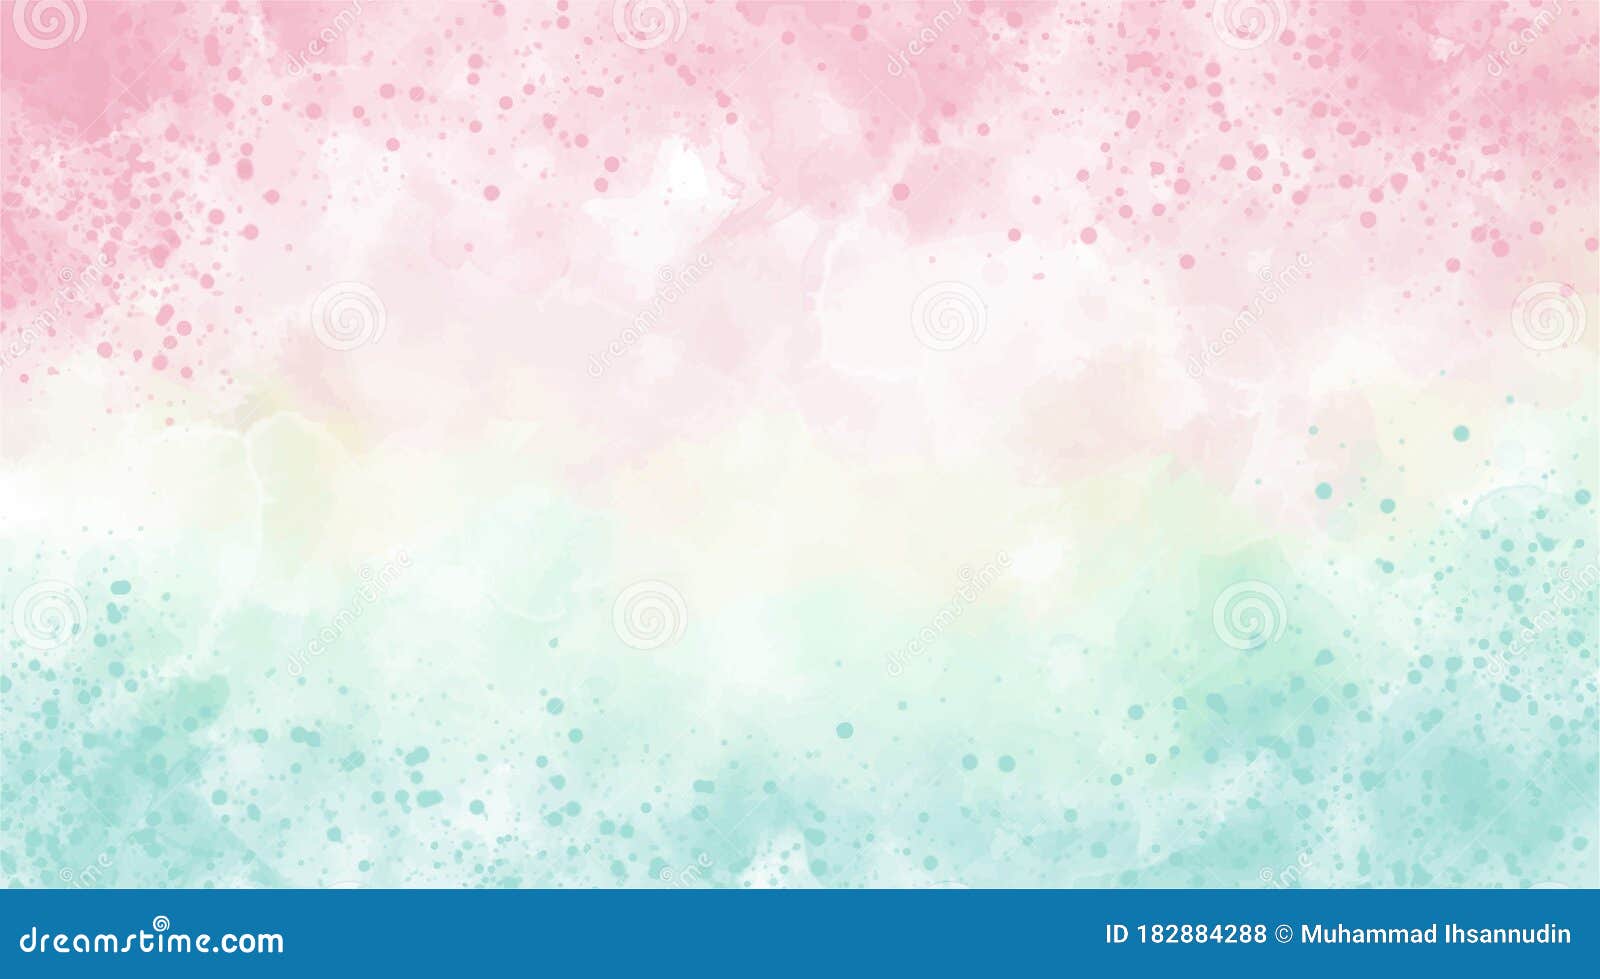 Beautiful Wallpaper HD Splash Watercolor Multicolor Blue Pink, Pastel  Color, Abstract Texture Background. for Google Slides/lette Stock Vector -  Illustration of graphic, drawing: 182884288